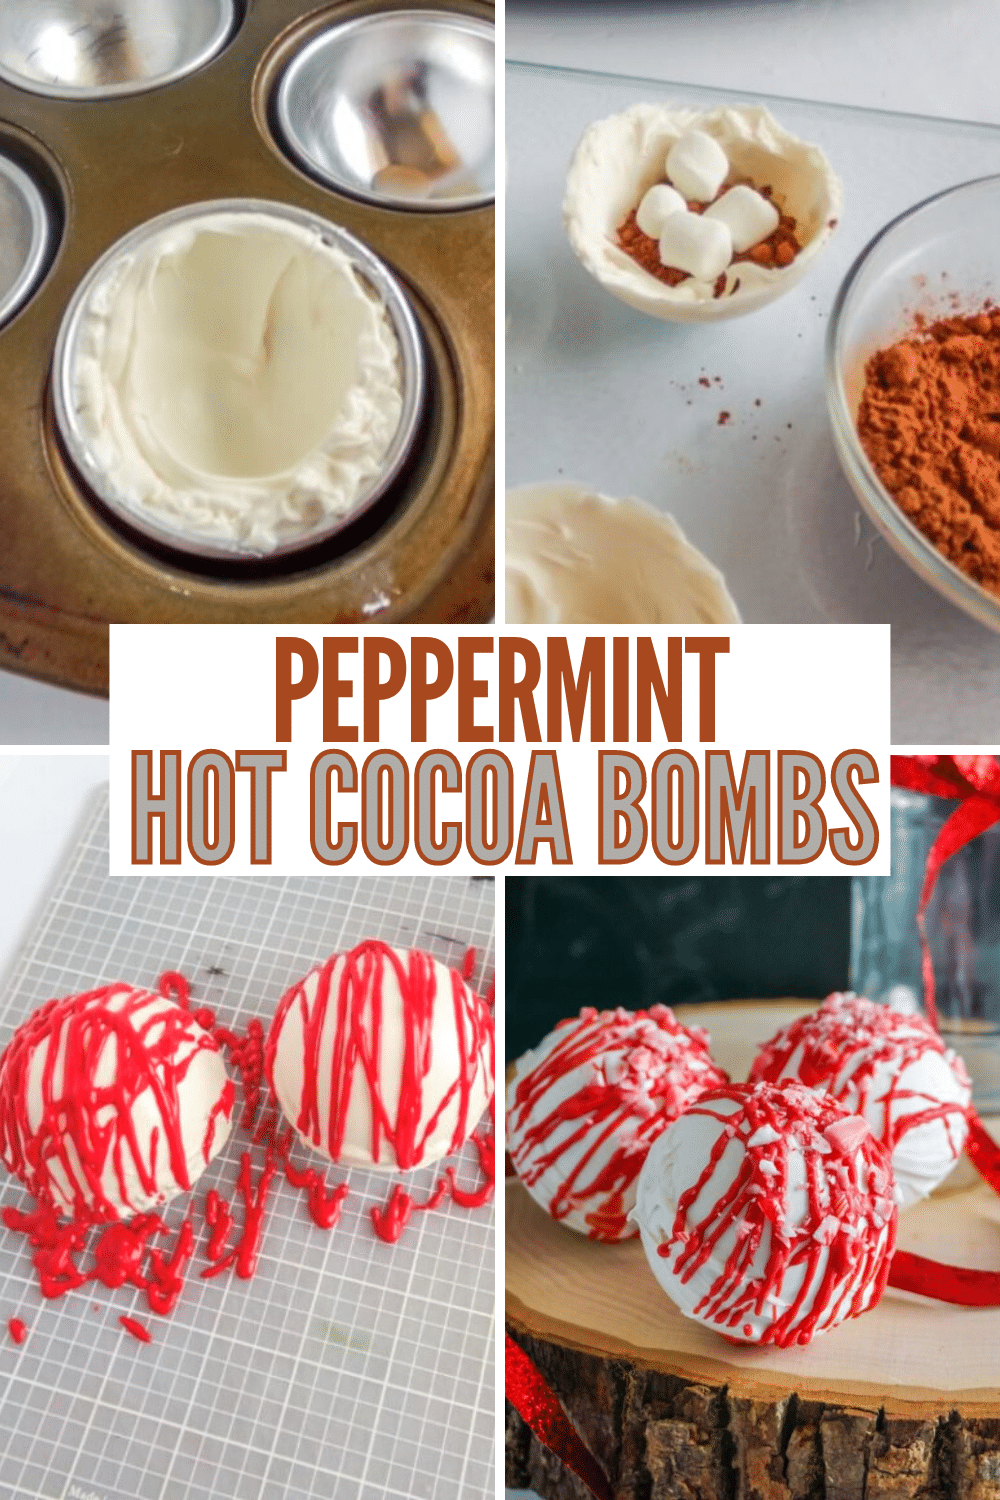 Peppermint Hot Cocoa Bombs are full of minty goodness! So much mint flavor in your cup of hot cocoa! Great for winter! #hotcocoabombs #hotcocoa #winter #peppermint via @wondermomwannab